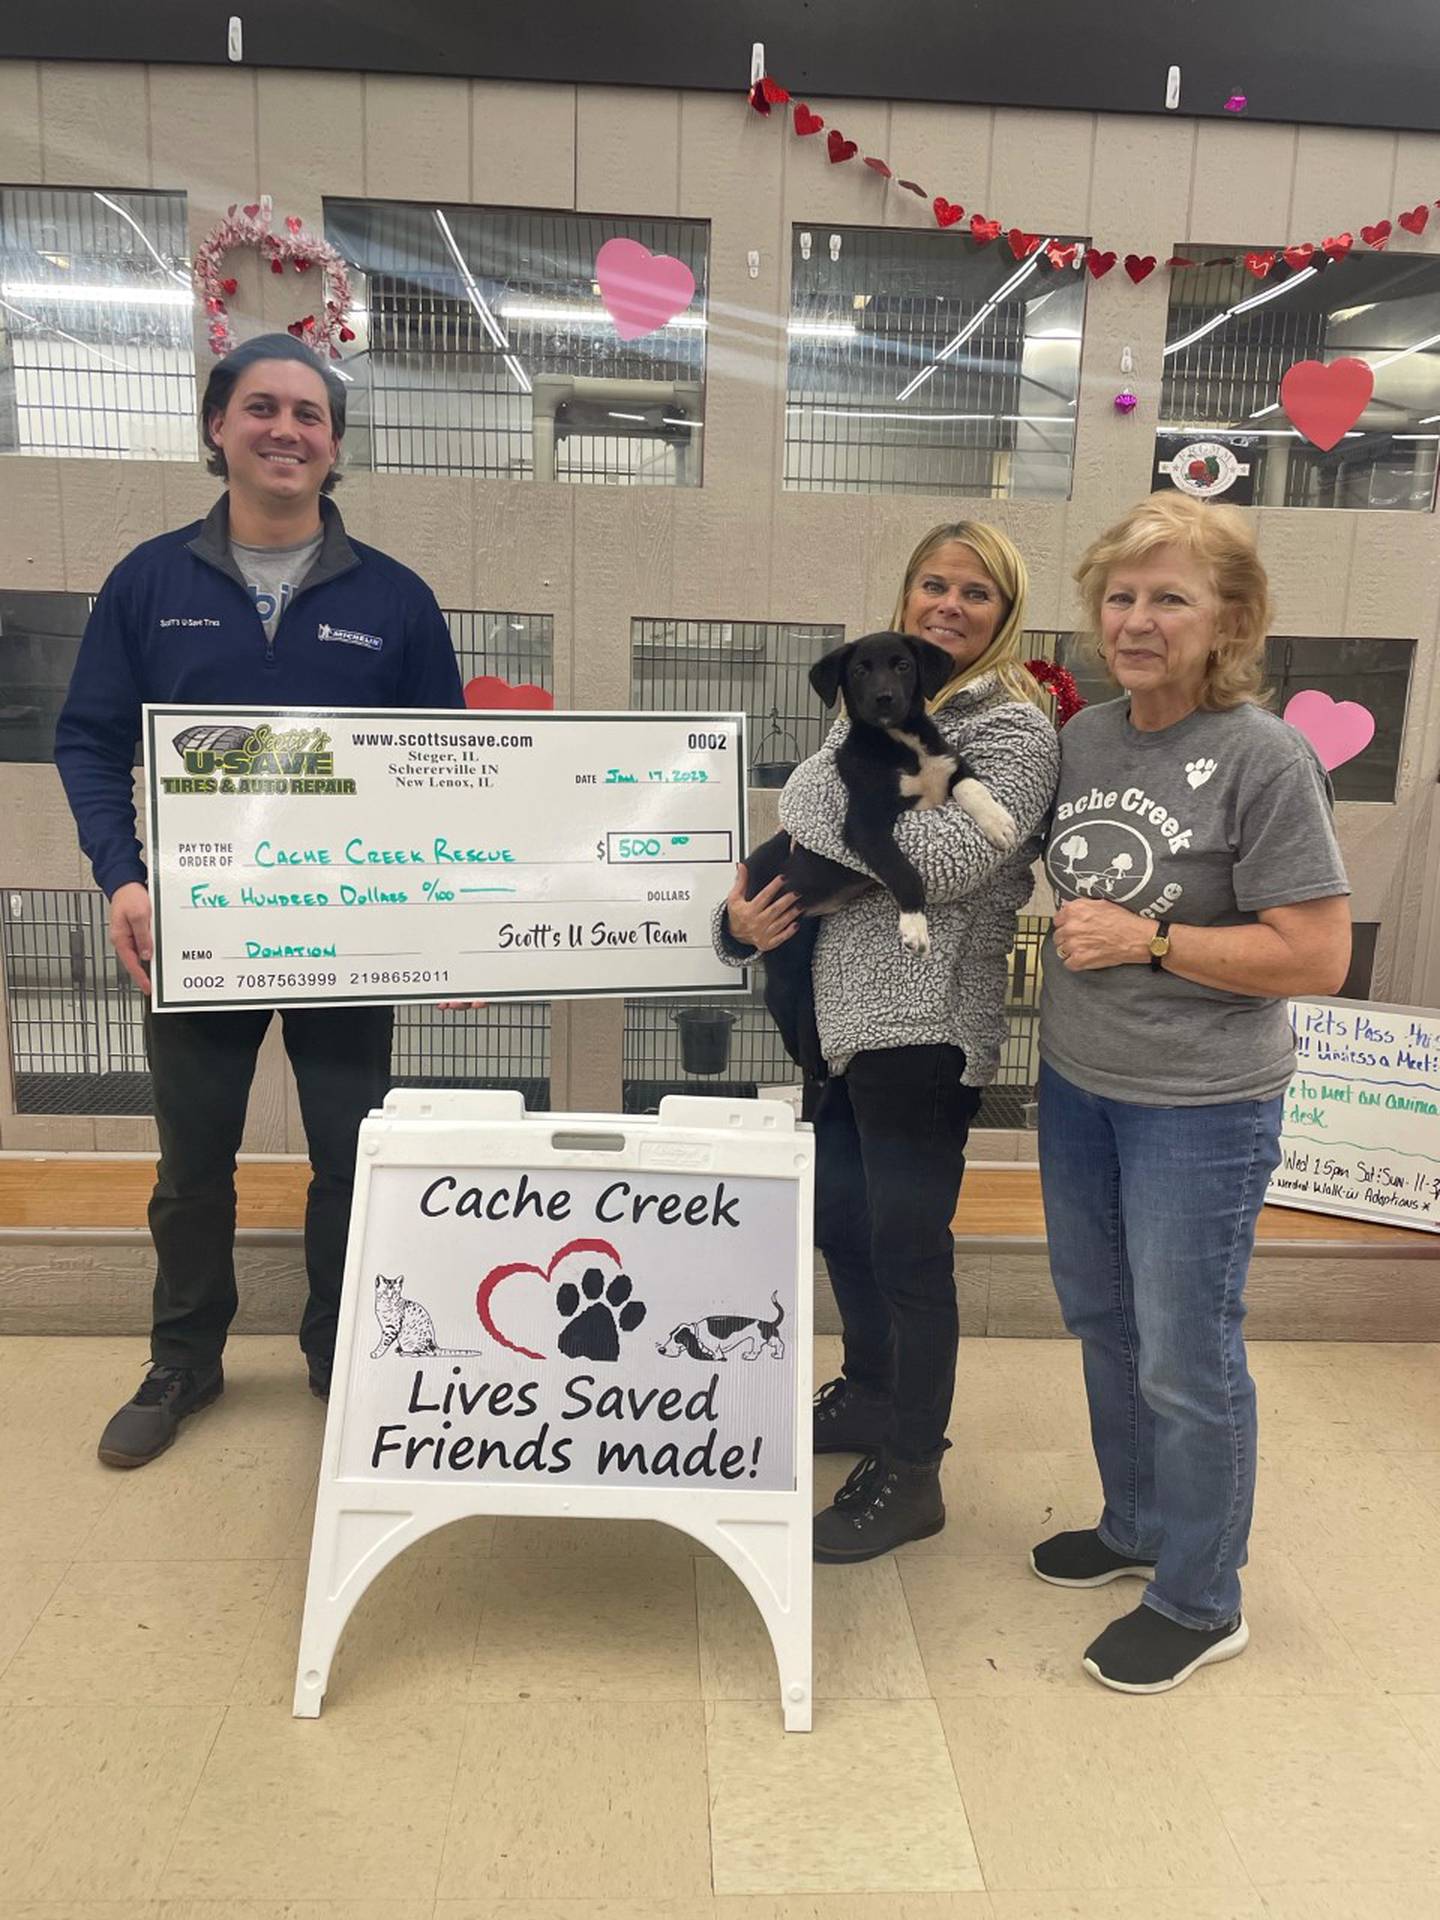 Scott’s U-Save Tires & Auto Repair donated $500 to Cache Creek Animal Rescue in Frankfort as part of its holiday contest this year. Pictured from left are Brad Templin, Scott’s U-Save Tires & Auto Repair operations manager, Sheri Templin, Scott’s U-Save Tires & Auto Repair owner, and Cindy Fitzpatrick from Cache Creek Animal Rescue.